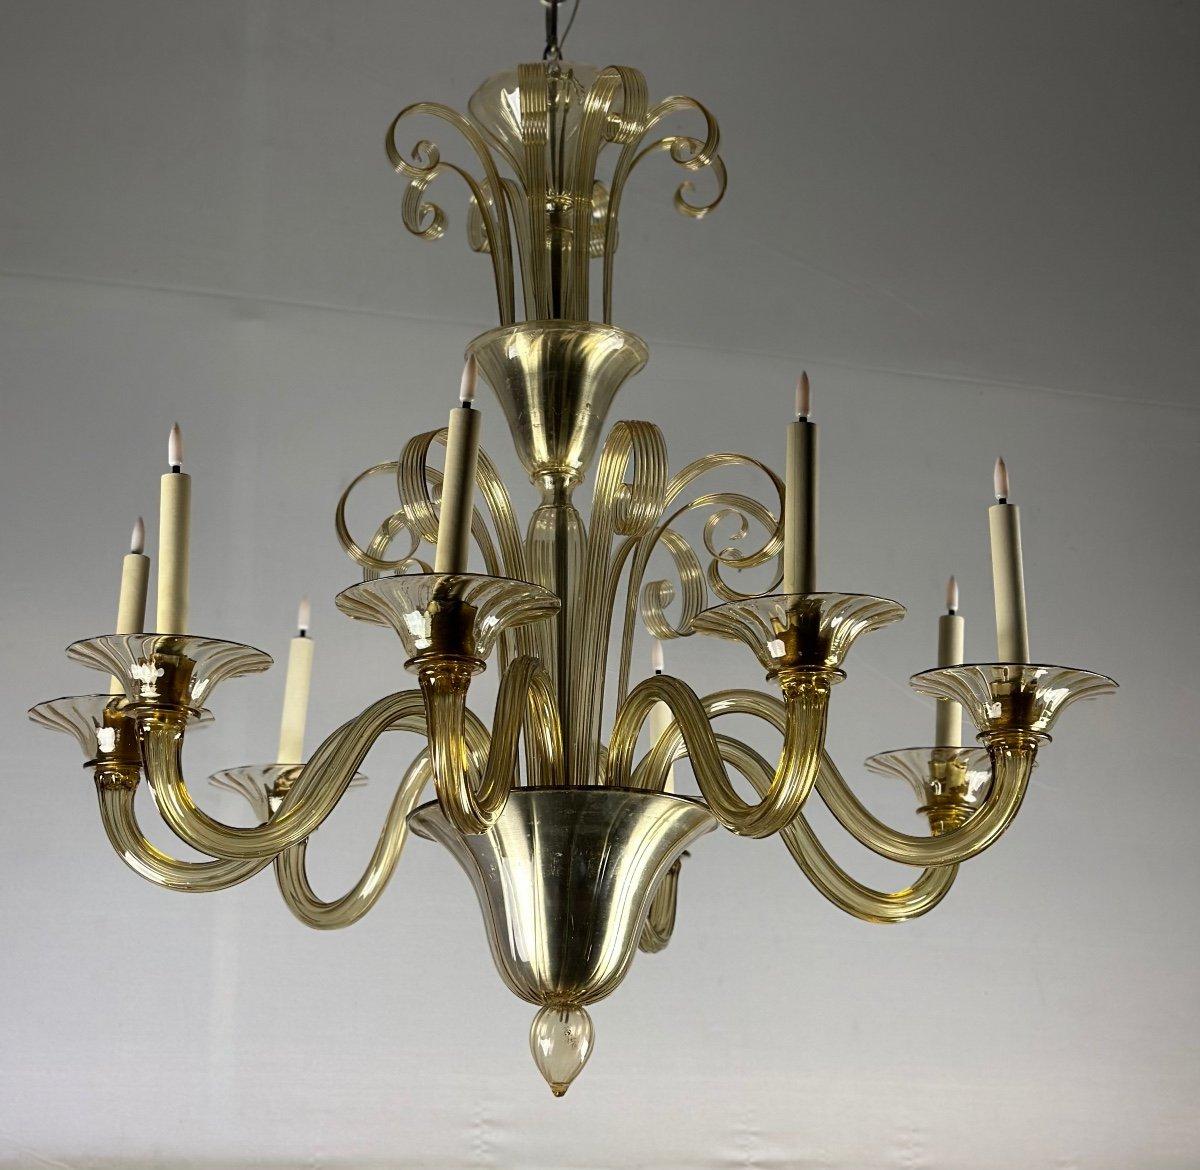 20th Century Venetian Chandelier In Golden Murano Glass, 8 Arms Of Light Circa 1940 For Sale